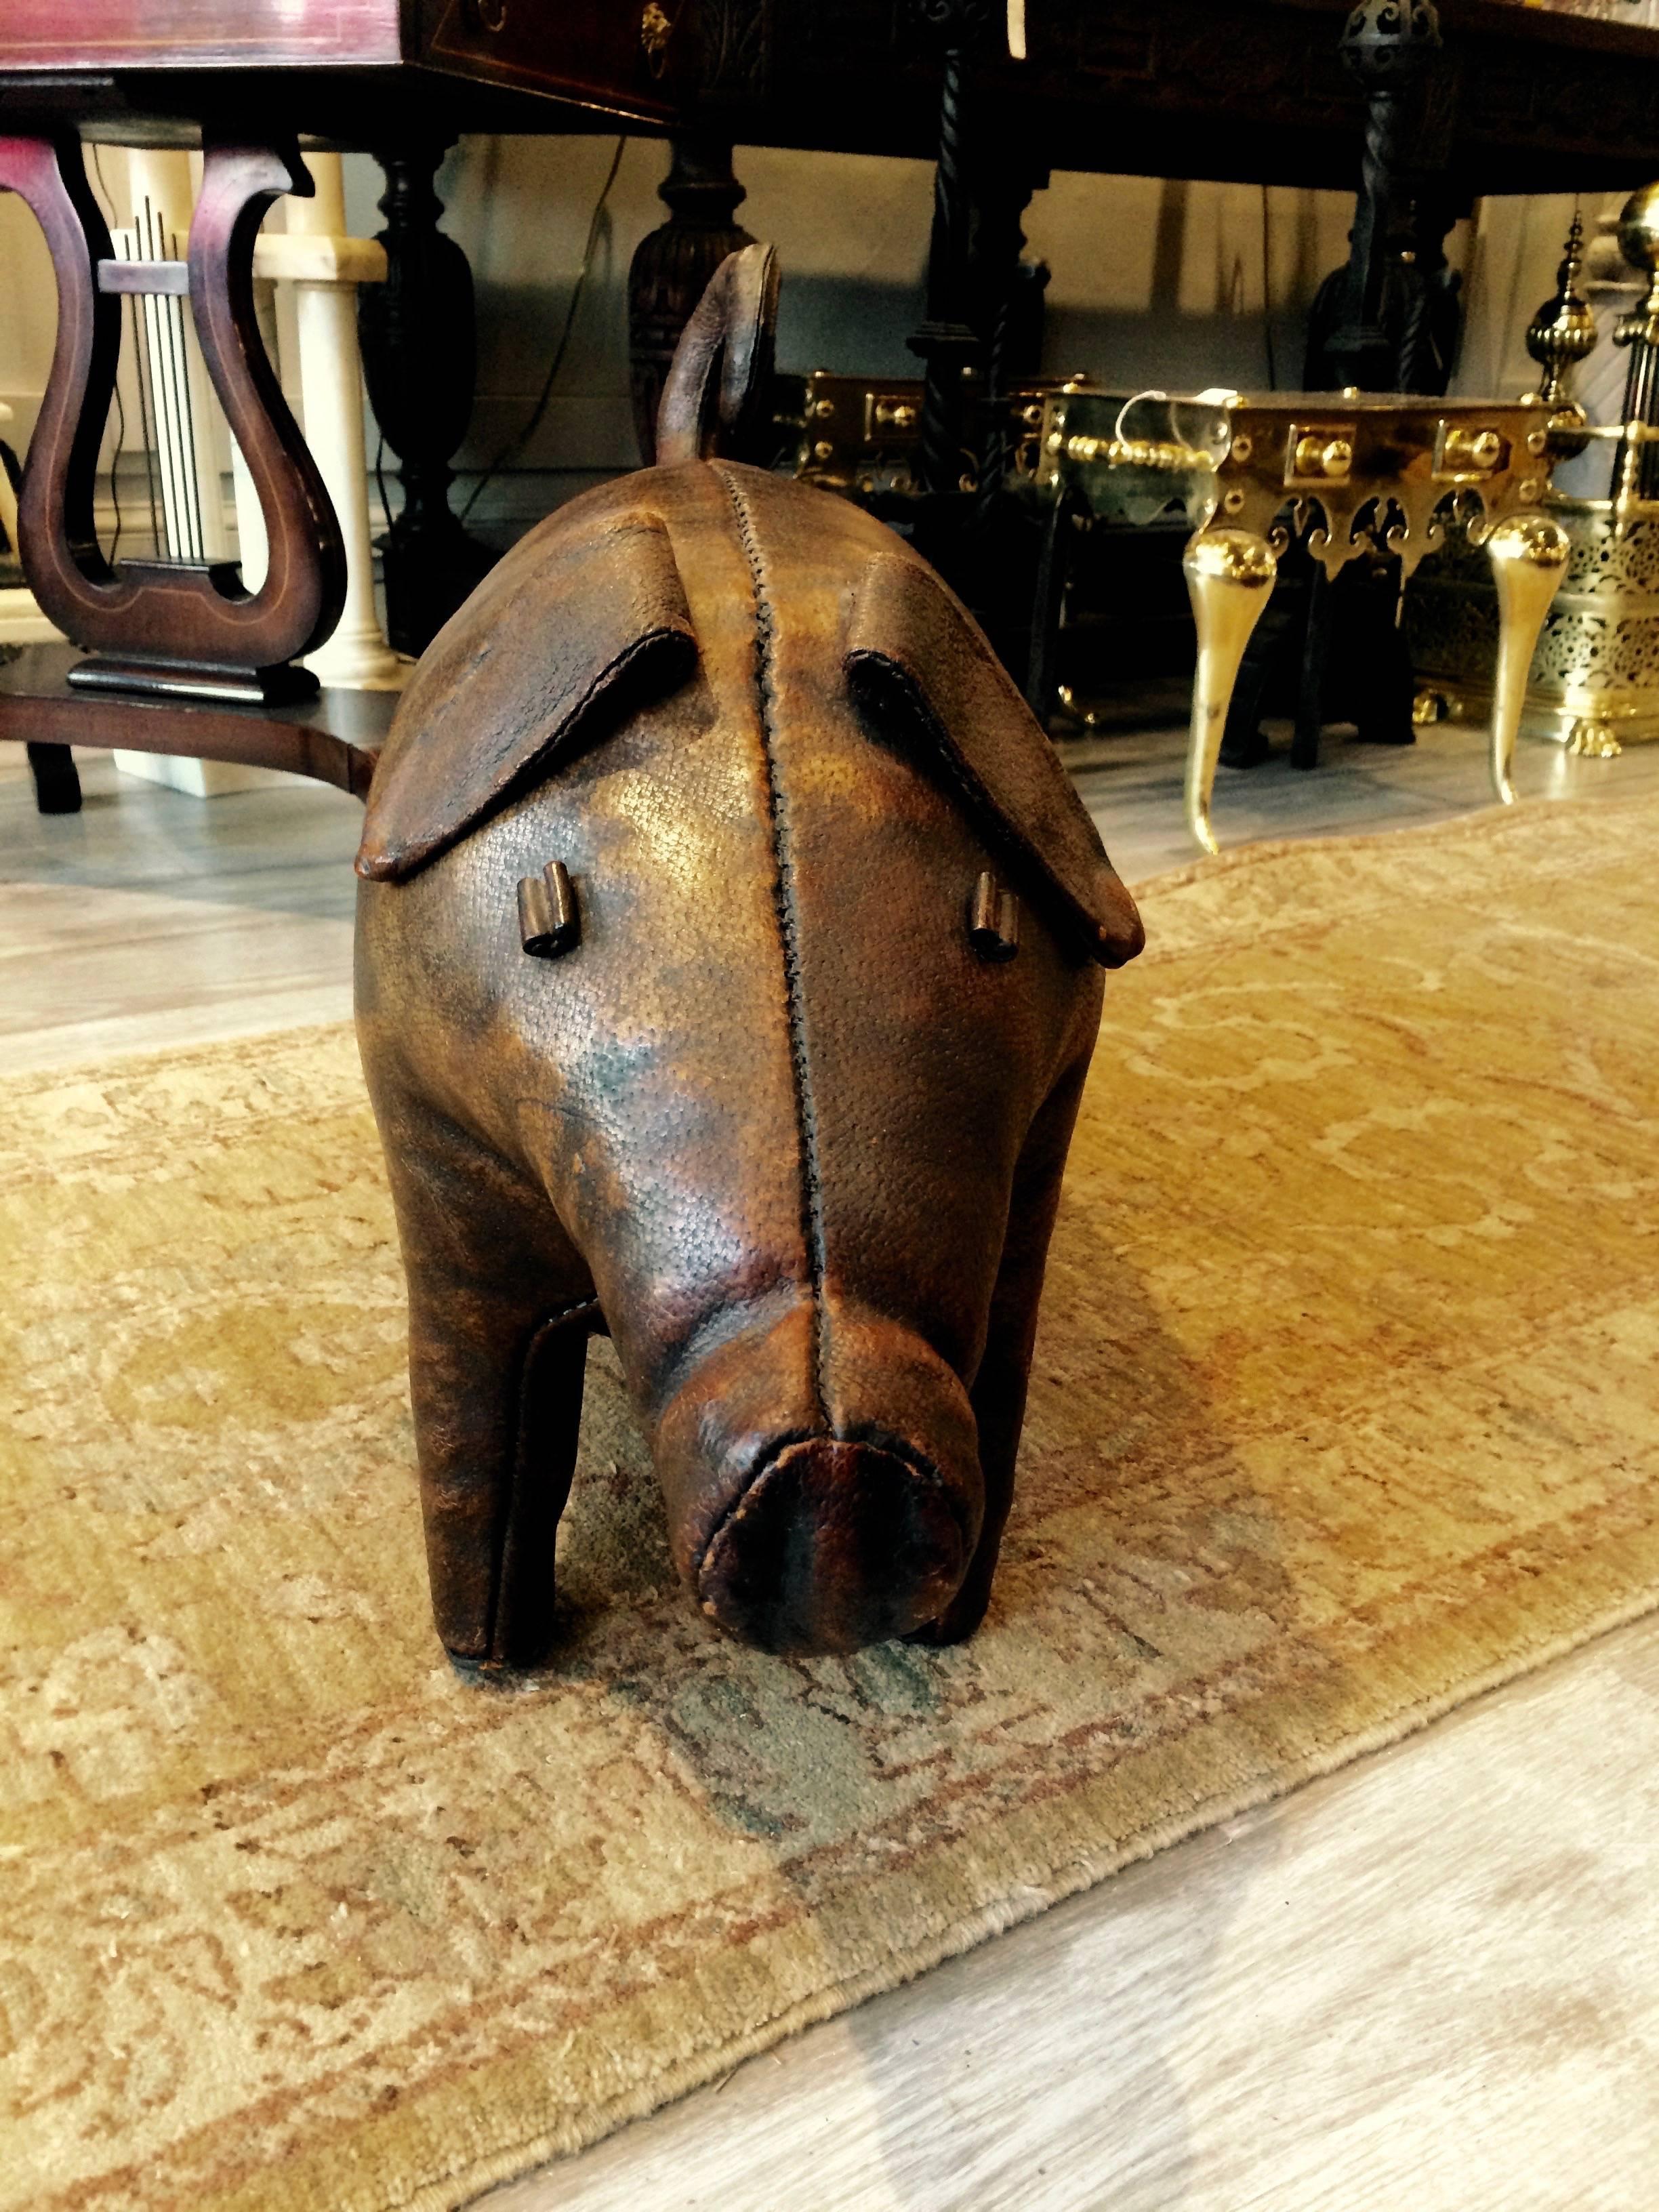 Whimsical leather pig designed by Dimitri Omersa for Abercrombie and Fitch in the 1960s. From a collection of leather animals that were meant to be used as ottomans and foot stools. Rich aged patina in great condition.